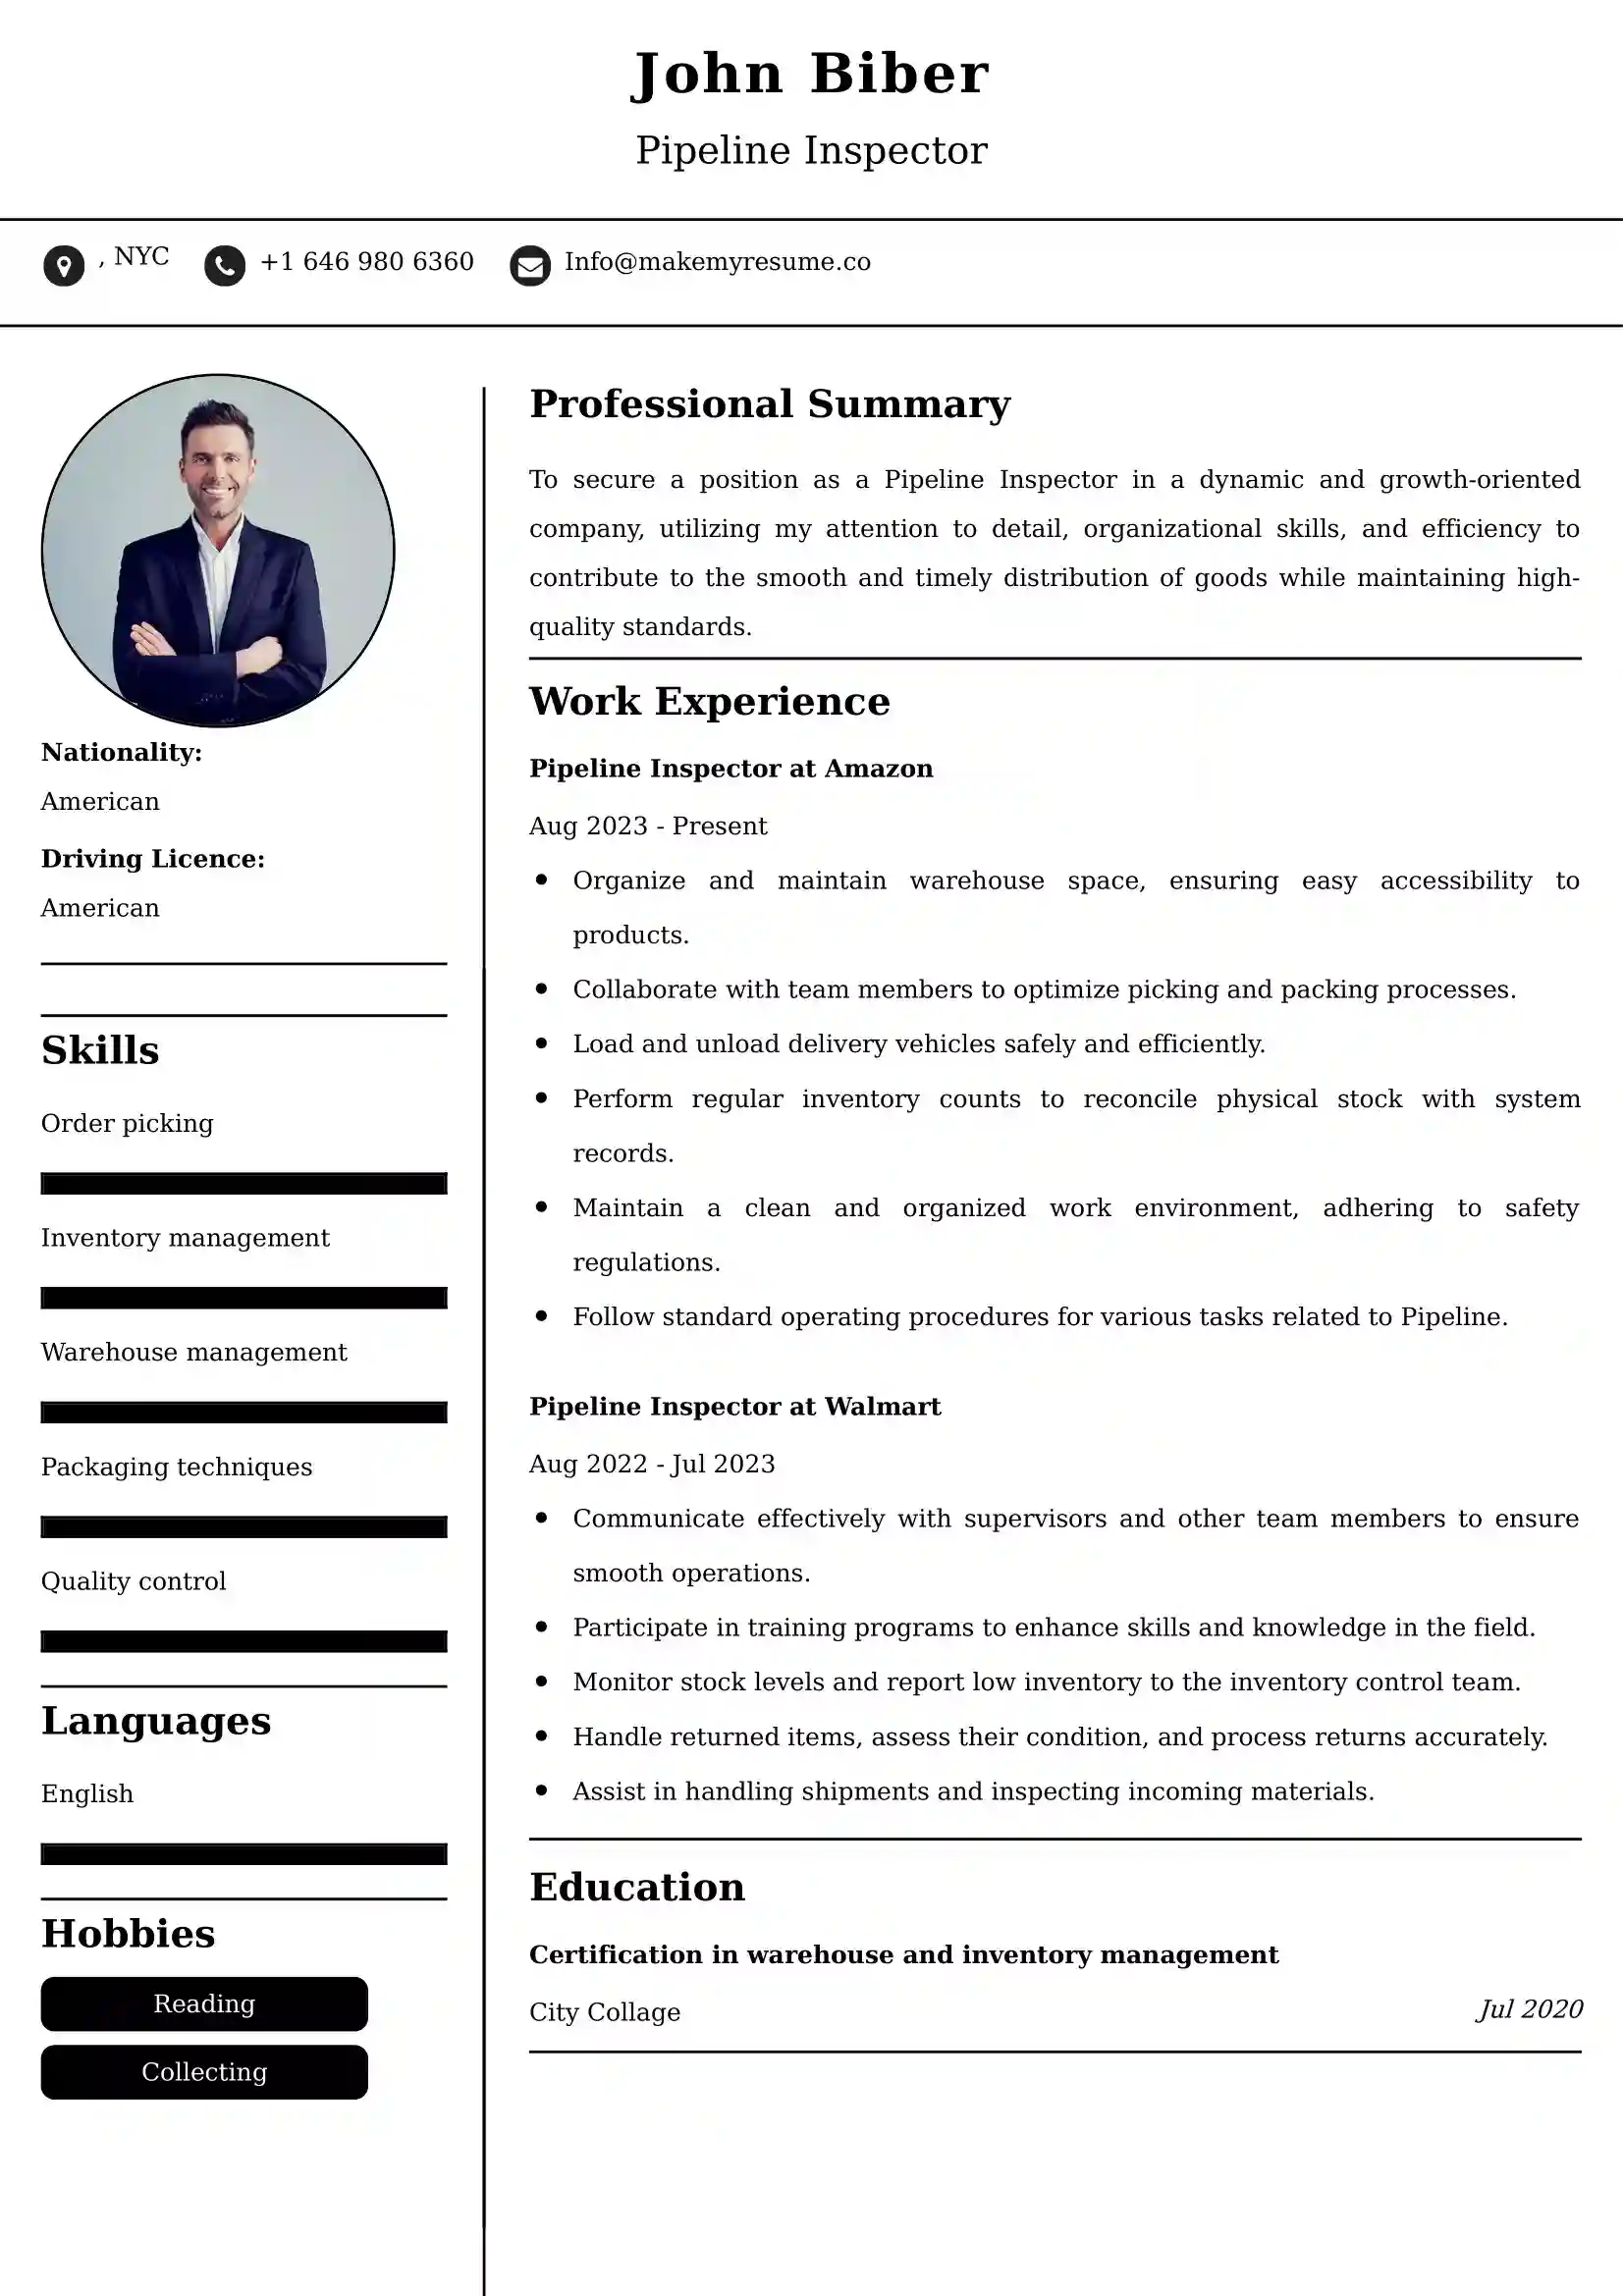 Pipeline Inspector Resume Examples India